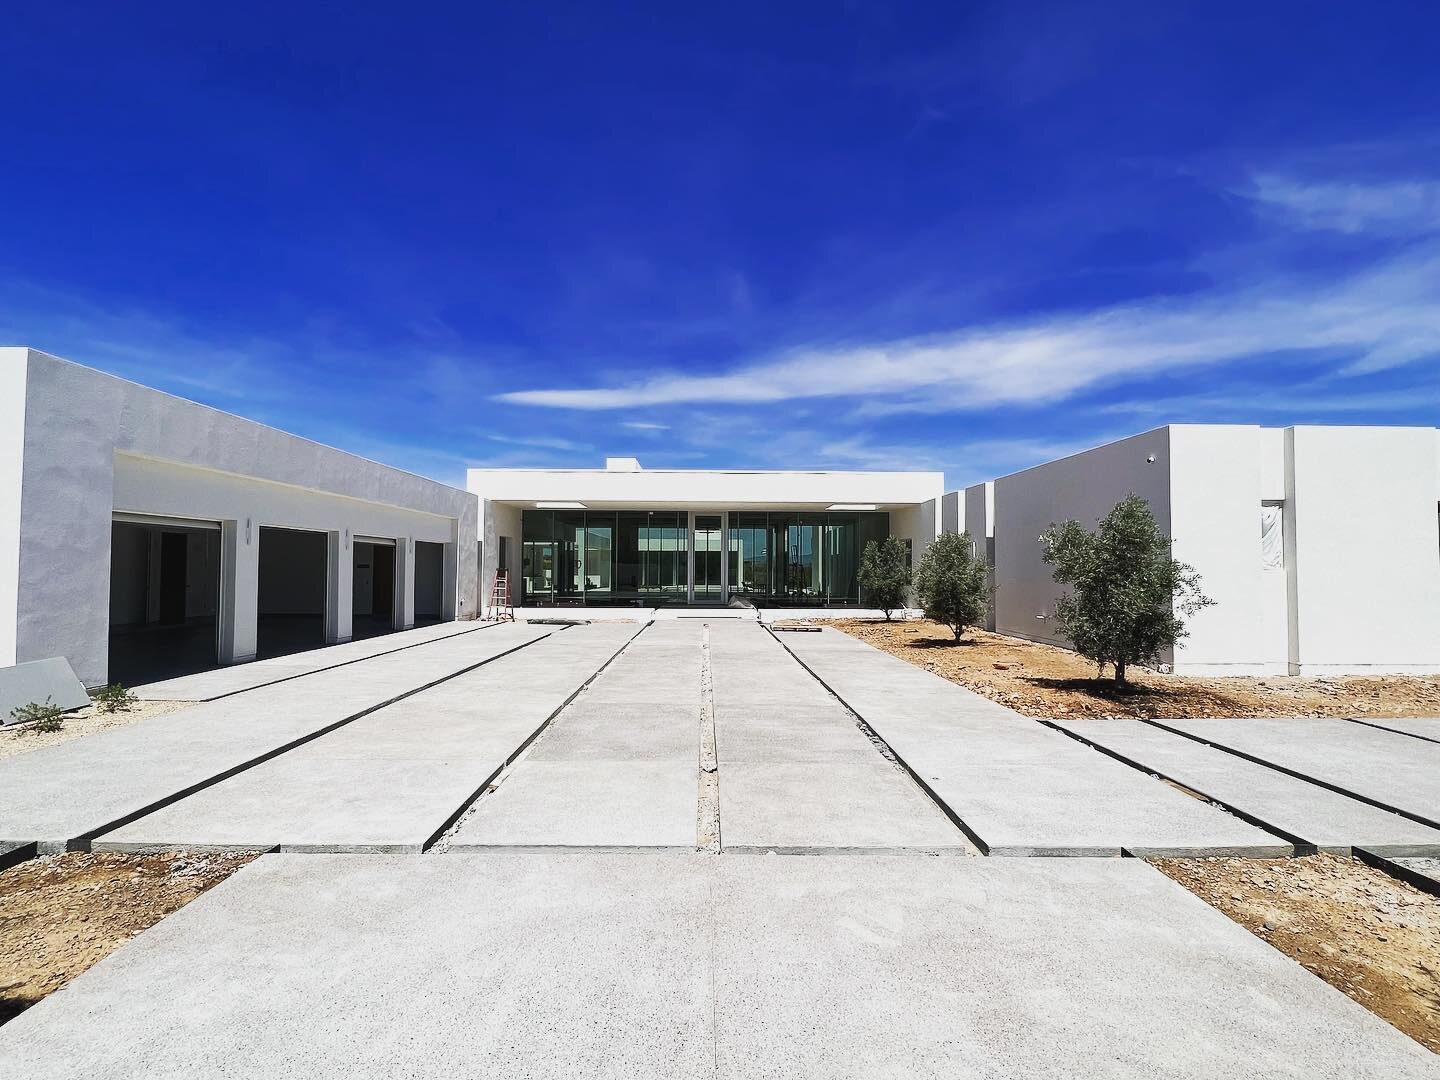 Home stretch of this one-of-a-kind project built with @sapanarodevelopment. We are so excited to bring this contemporary desert home to life within the next couple of weeks!